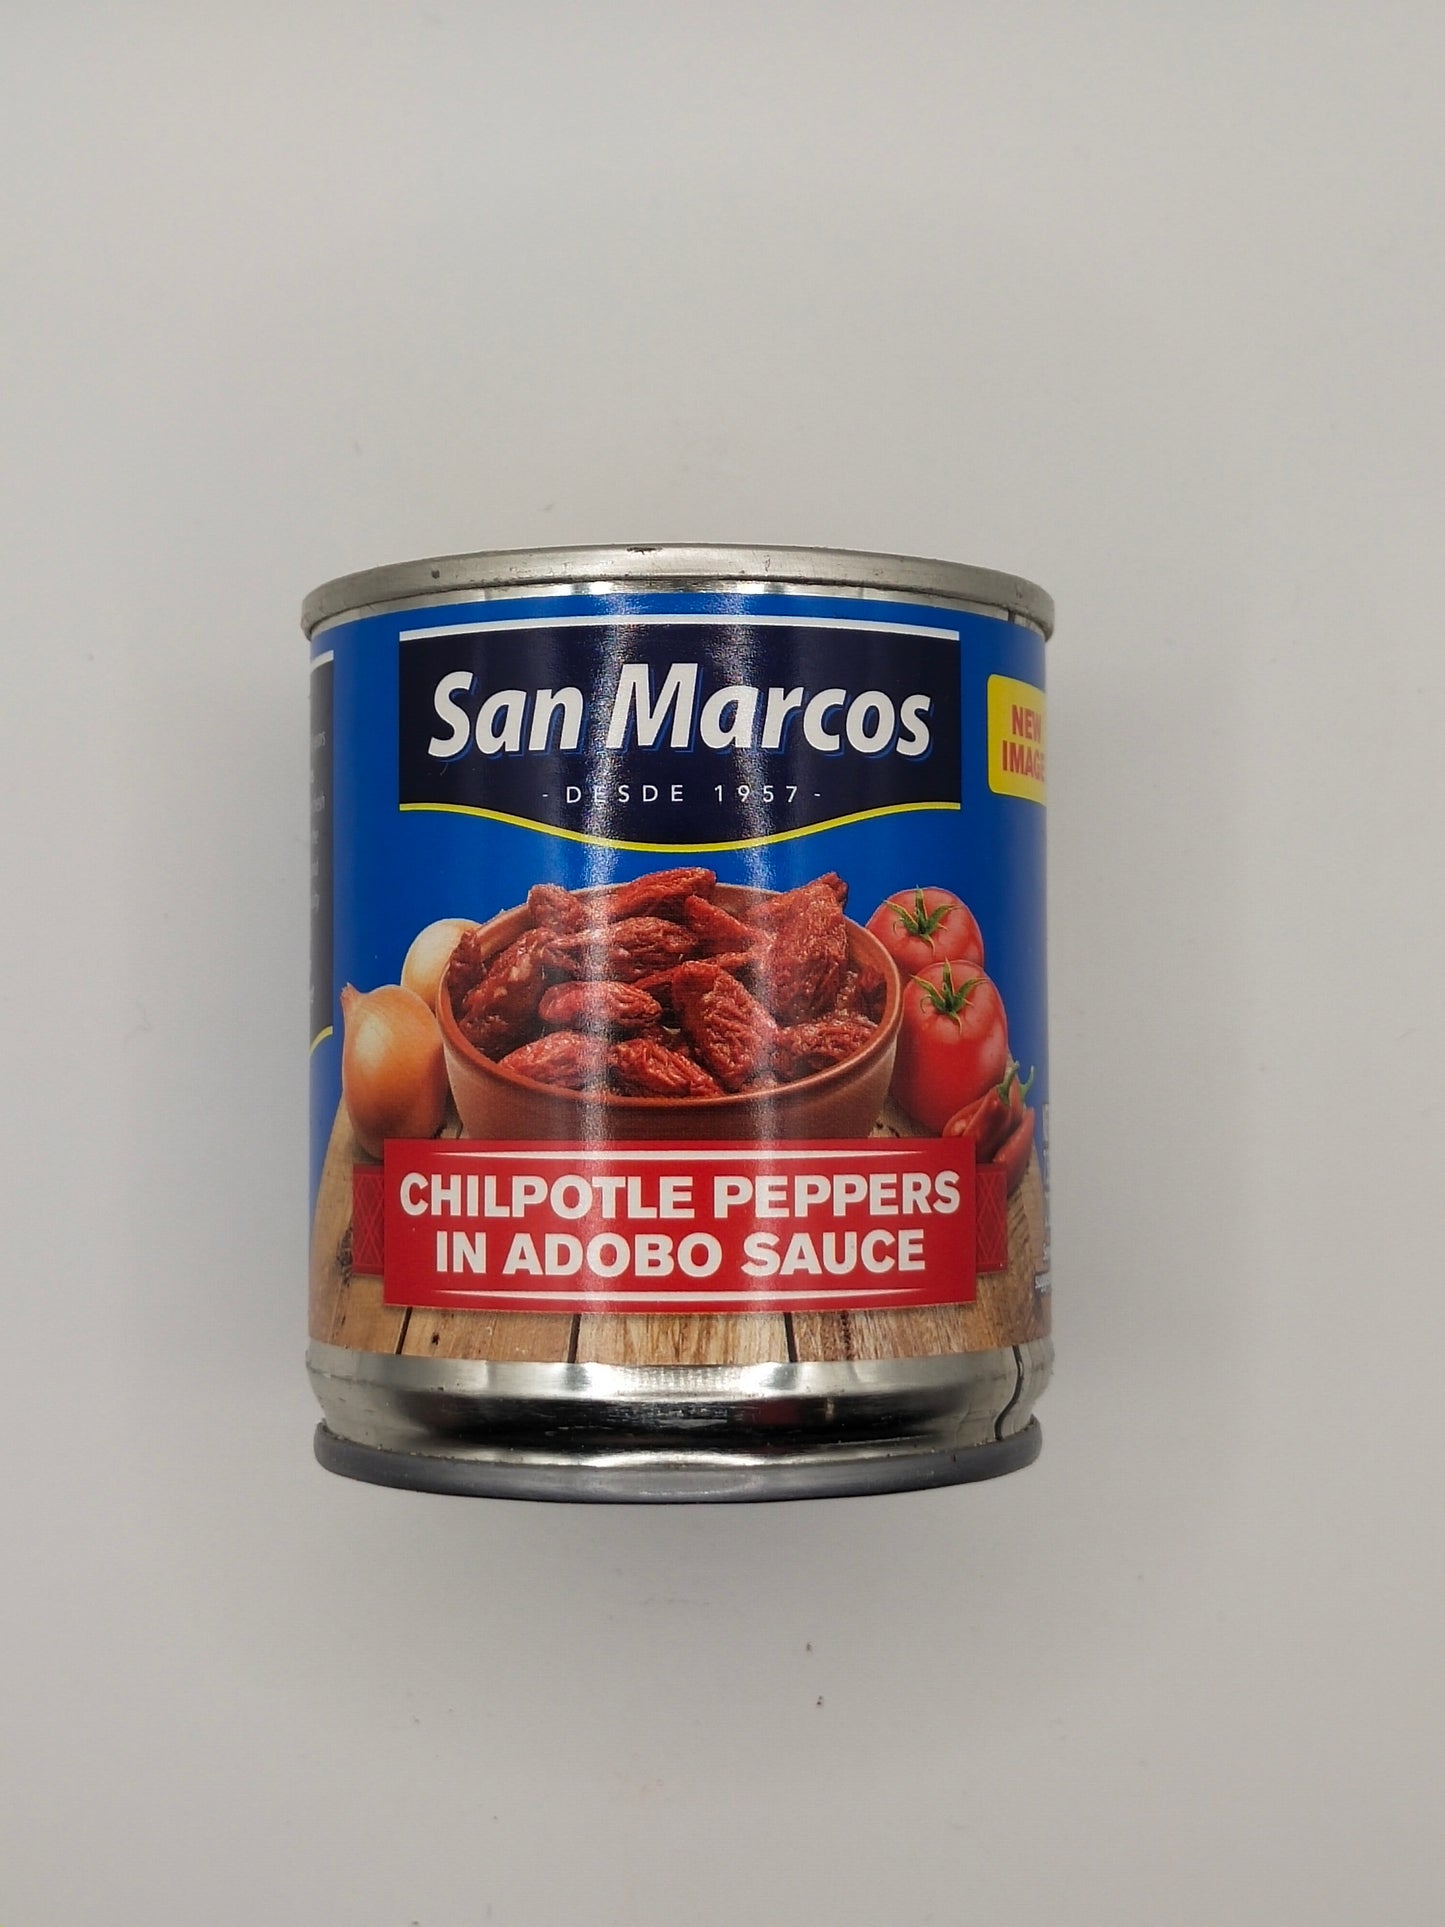 San Marcos - Chipotle Peppers in Adobo Sauce